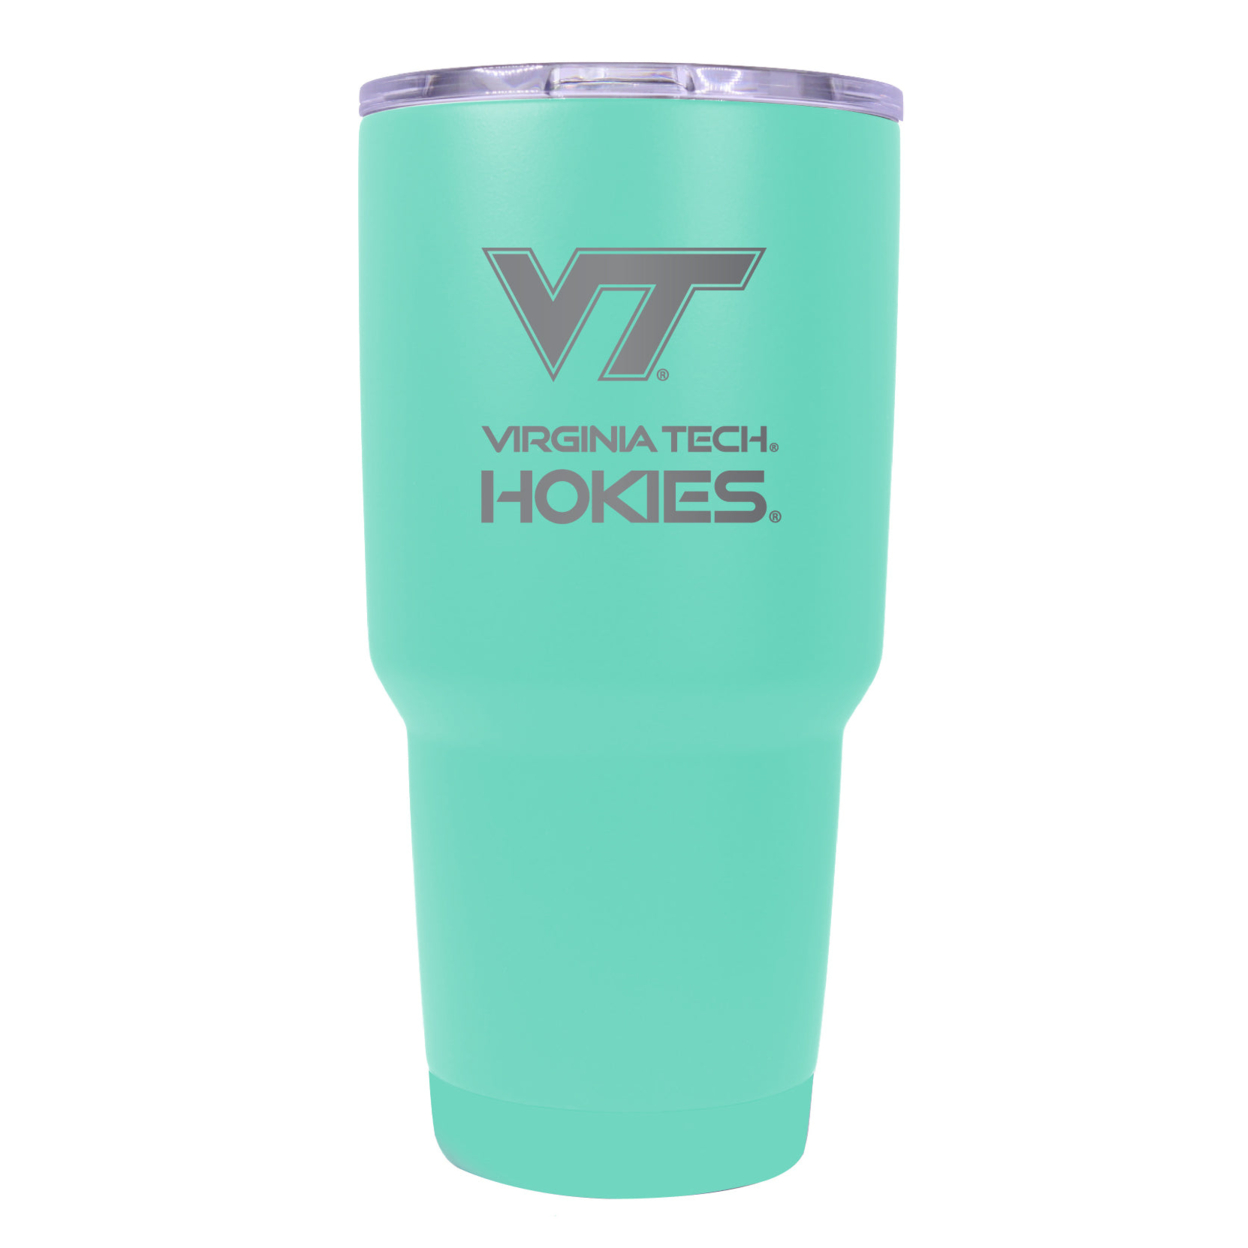 Virginia Tech Hokies 24 Oz Insulated Tumbler Etched - Choose Your Color - Seafoam